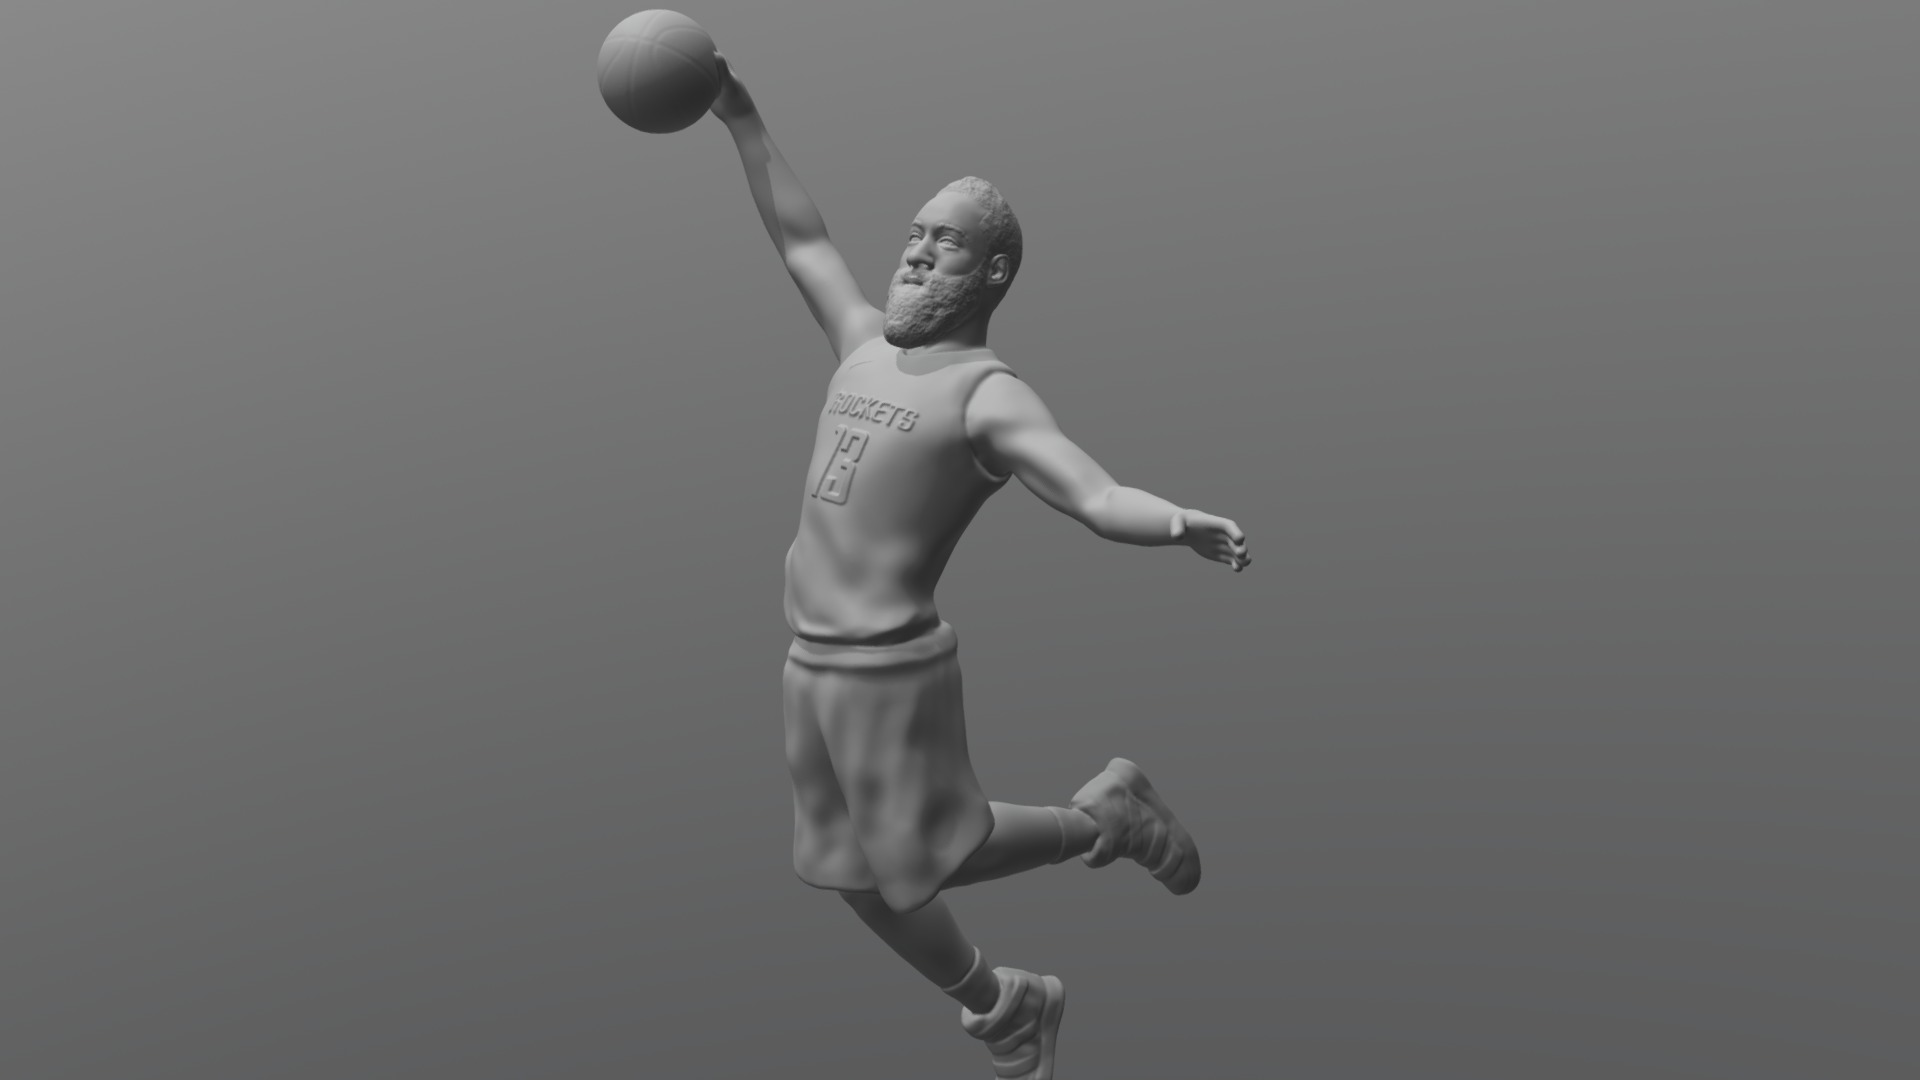 3D model James Harden for 3D printing - This is a 3D model of the James Harden for 3D printing. The 3D model is about a woman in a uniform jumping to catch a ball.